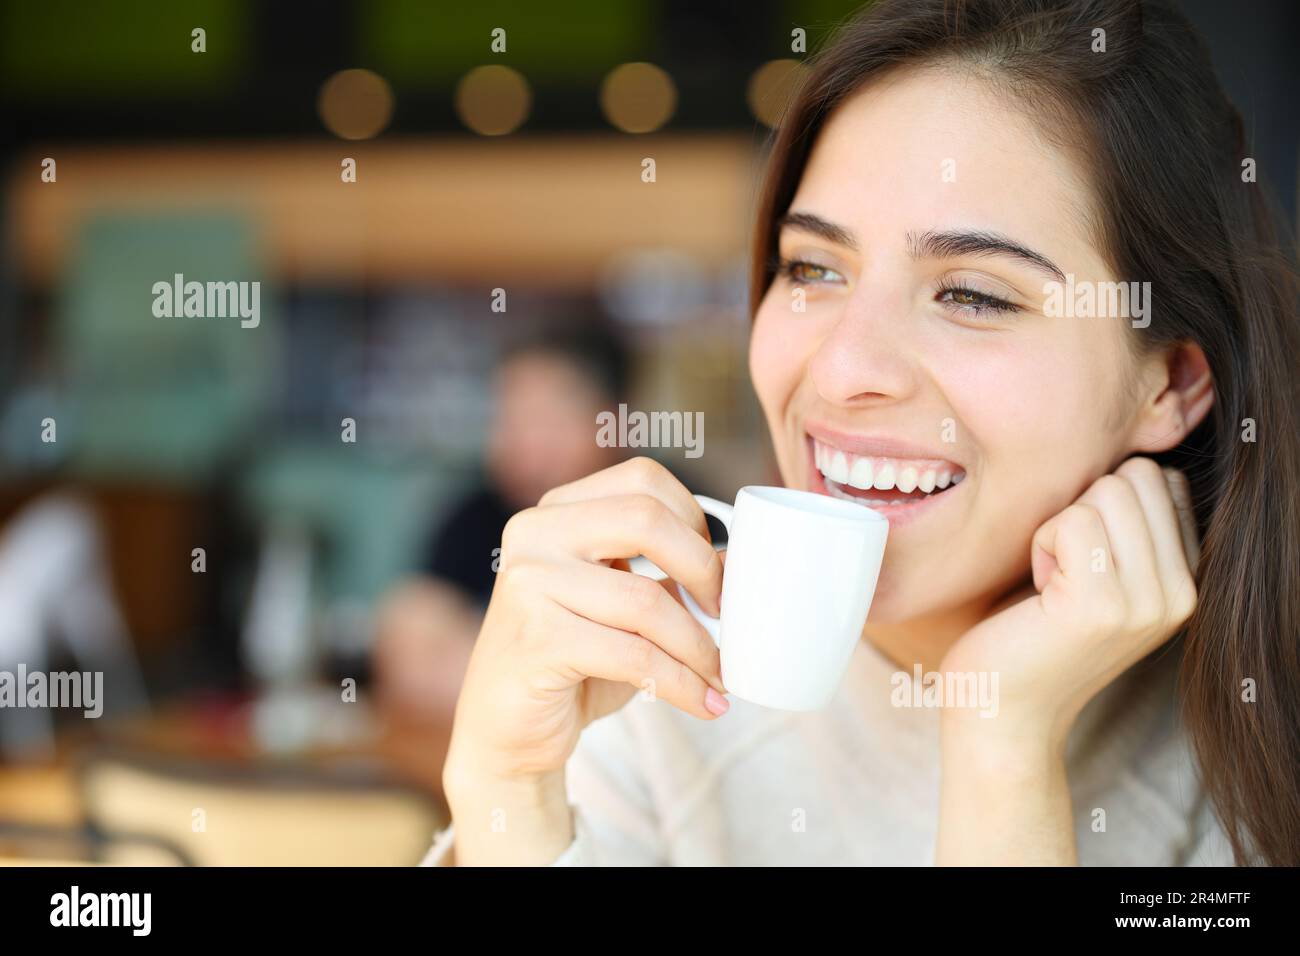 Happy woman drinking coffee and laughing in a restaurant interior Stock Photo